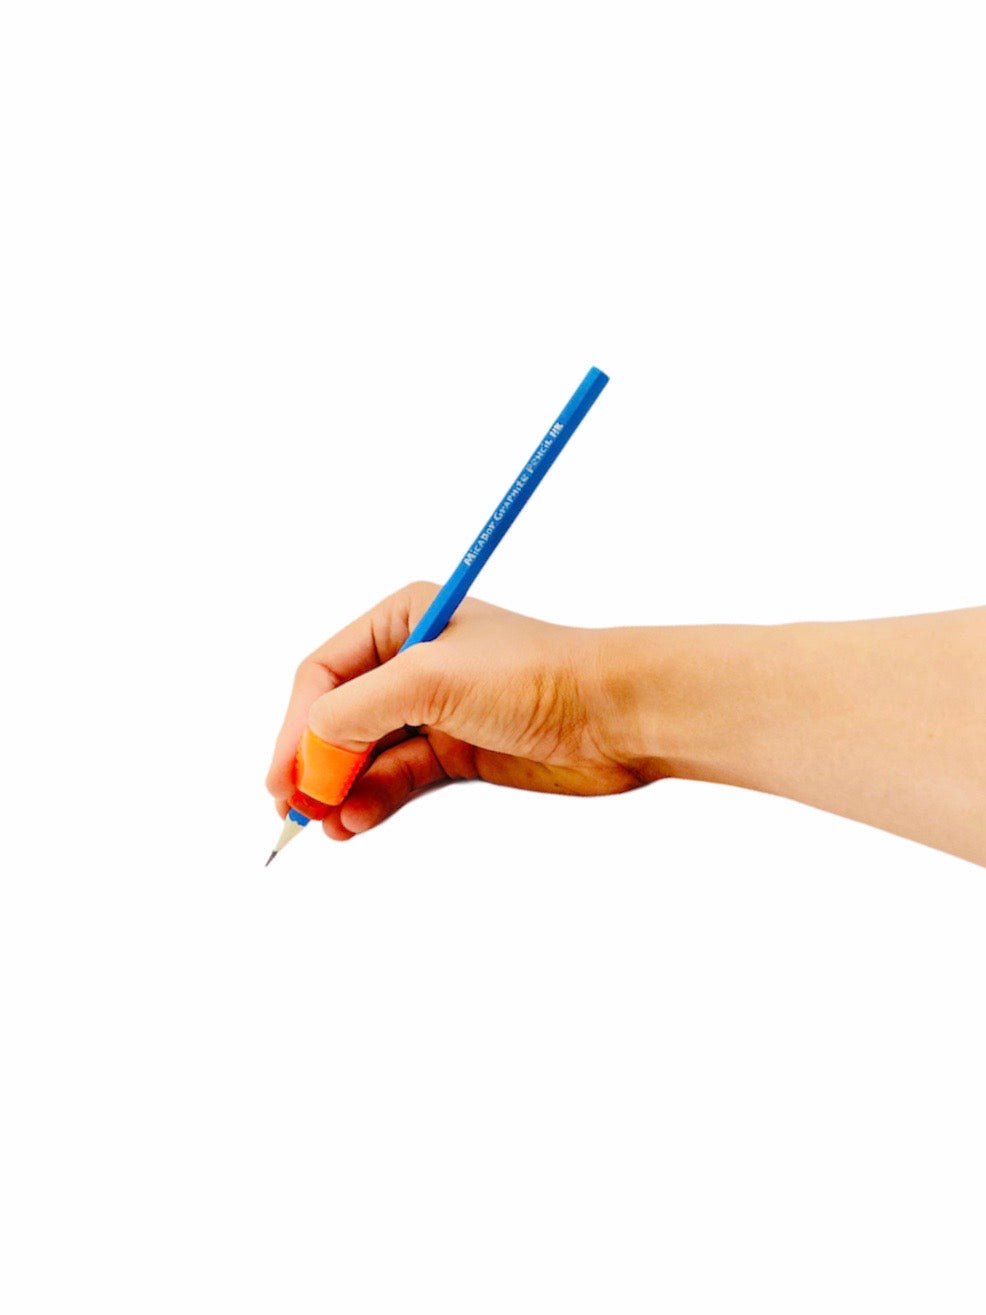 a hand using the Pencil Grip Pointer Grip with blue pencil